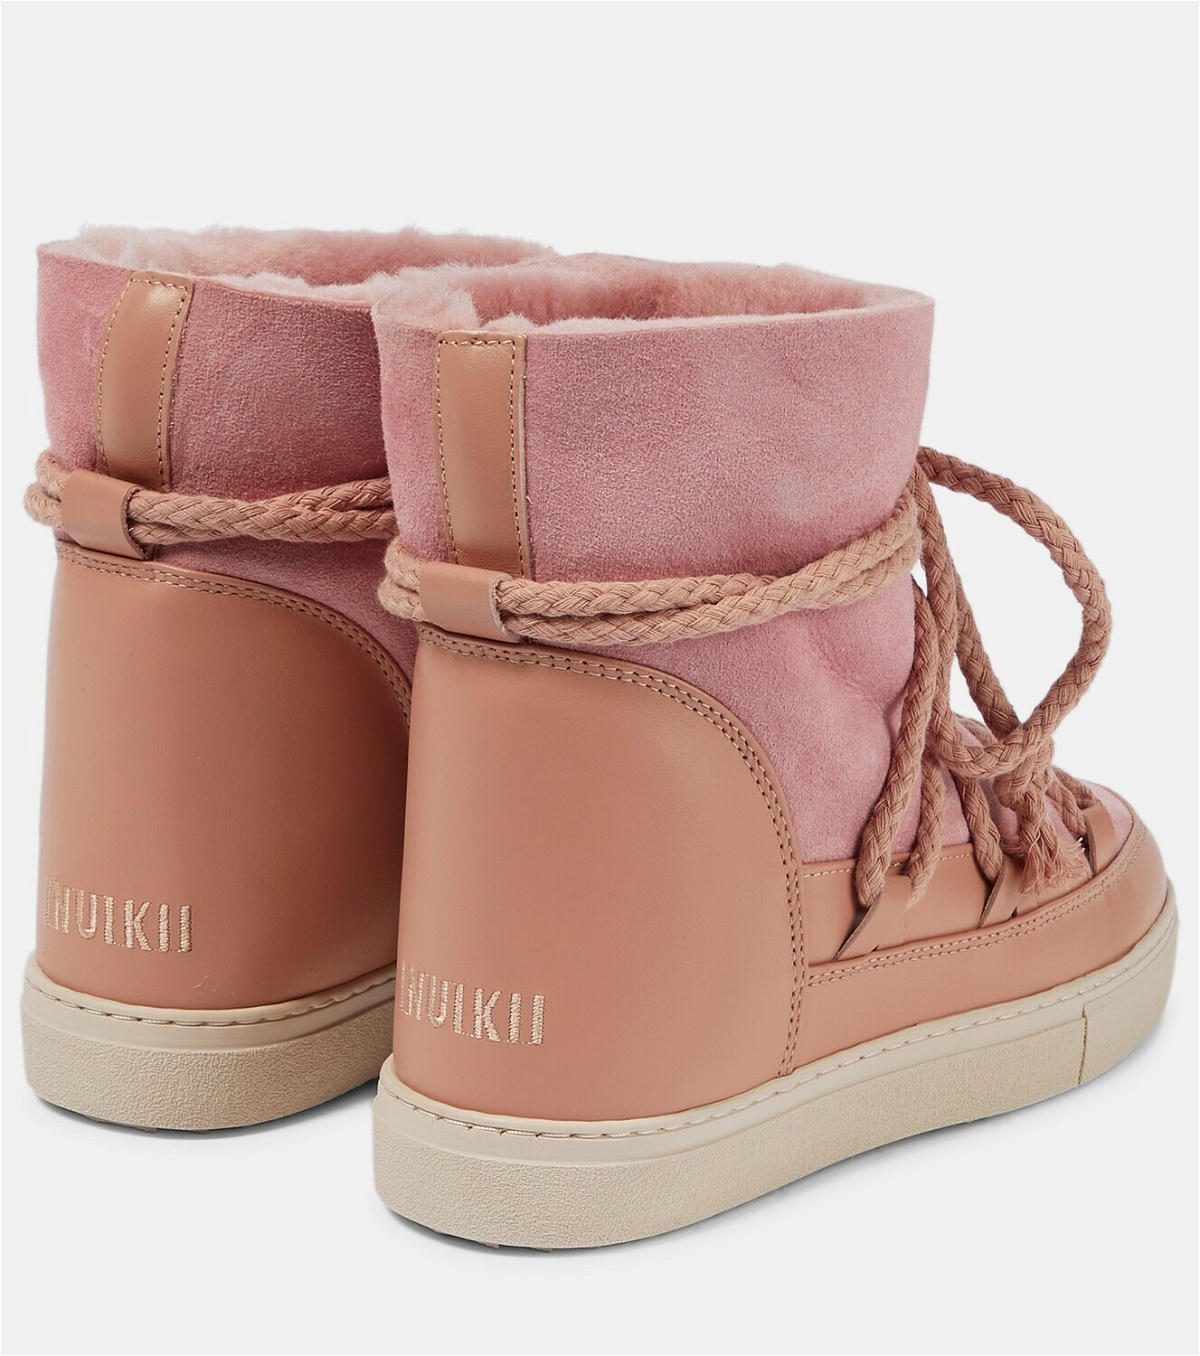 Inuikii Sneaker Classic leather ankle boots